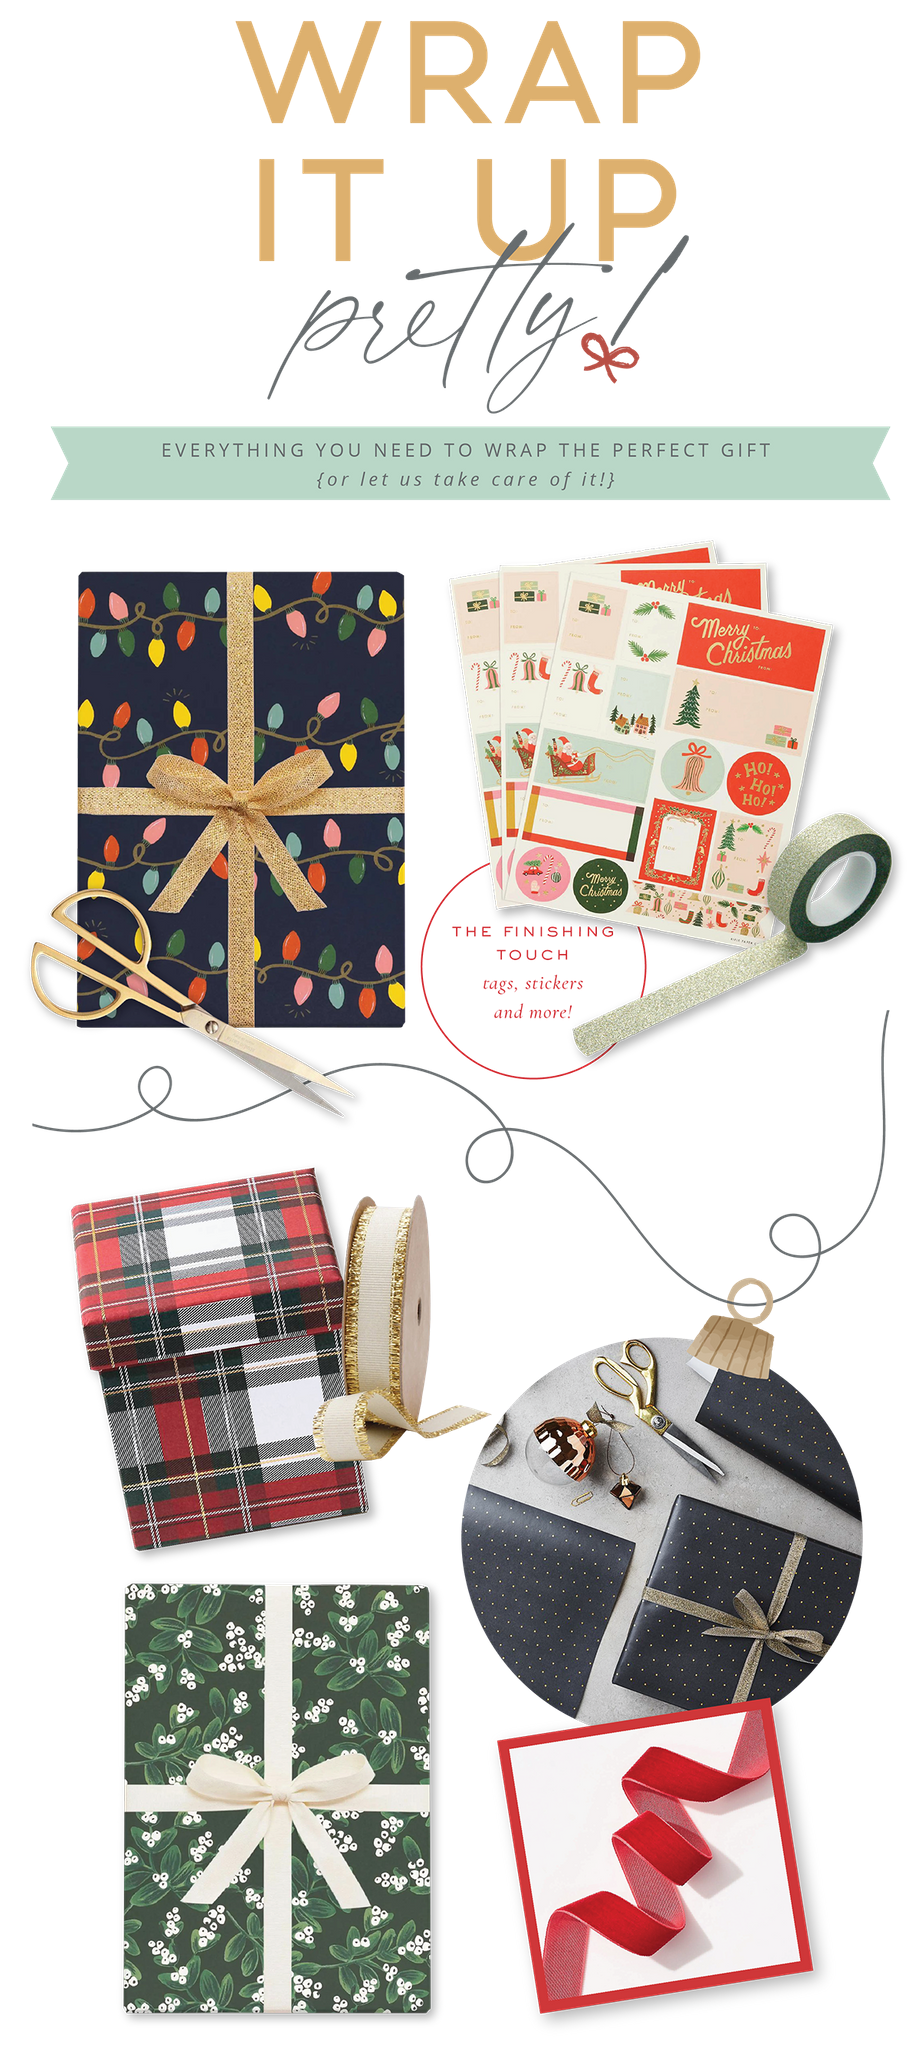 urbanic paper boutique los angeles wrap service wrapping paper gift tags ribbon scissors tape pretty